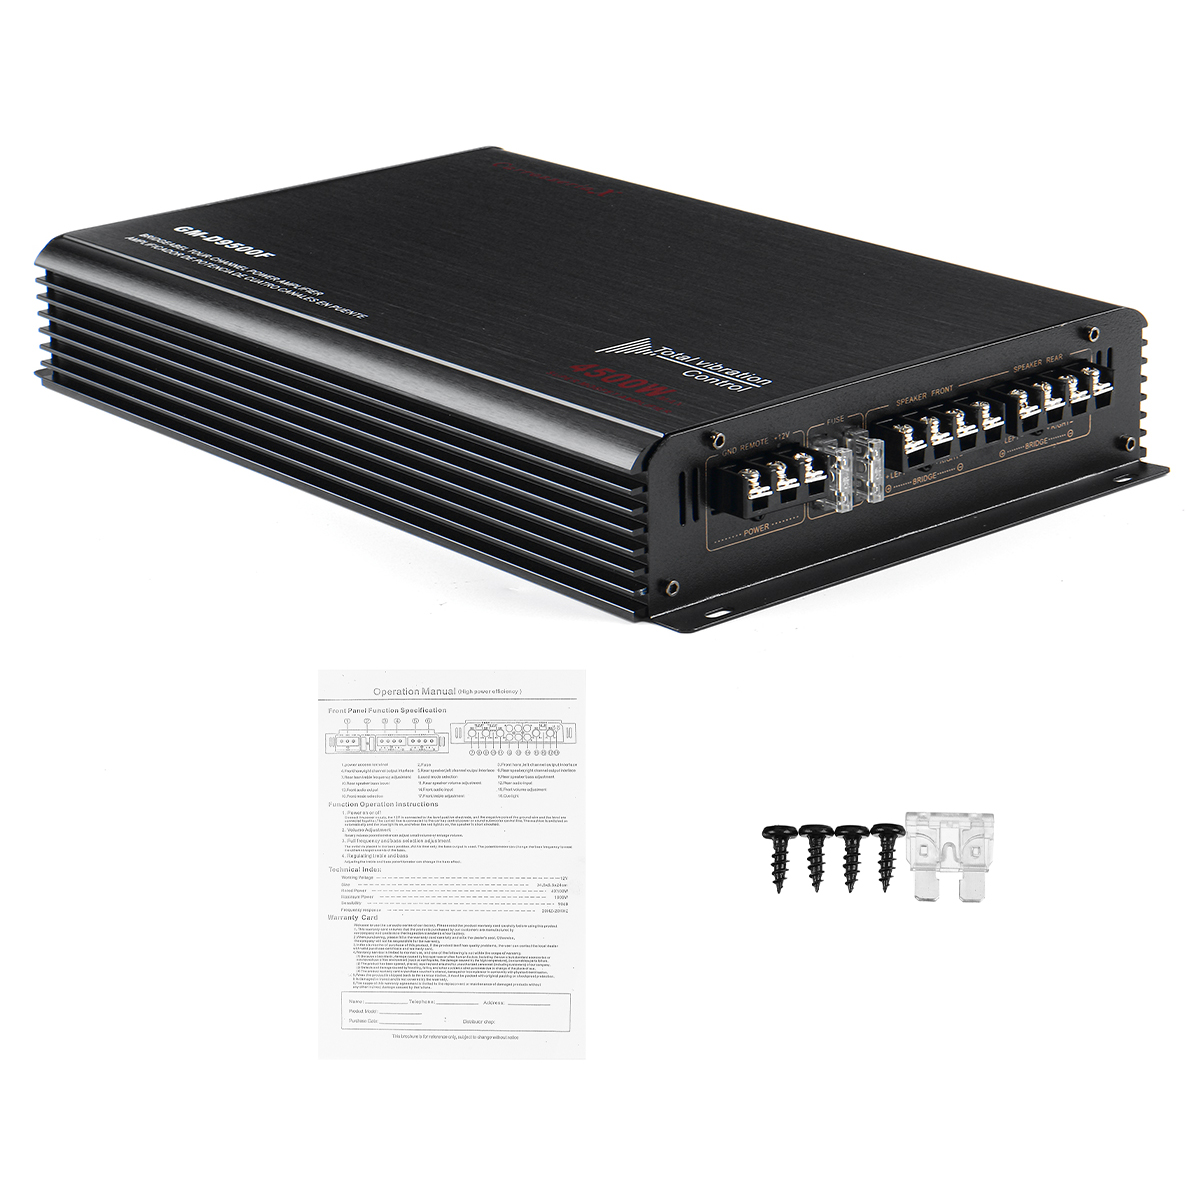 GM-D9500F 12V 4500W Car Audio Stereo Power Amplifier 4 Channel Class A/B 3D Stereo Surround Subwoofer